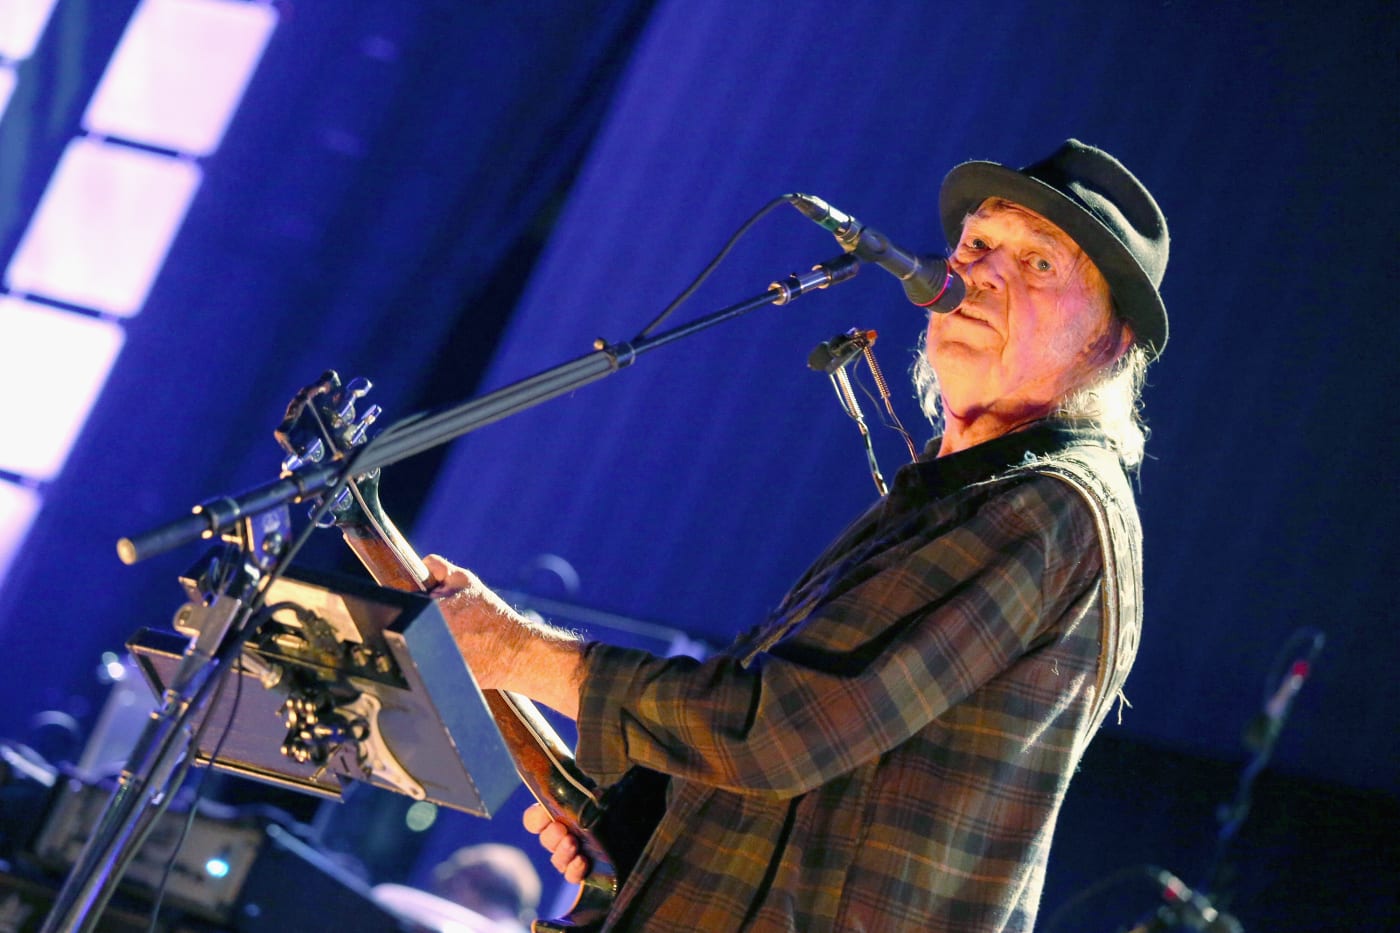 The Morning After: Neil Young returns to Spotify after two-year protest